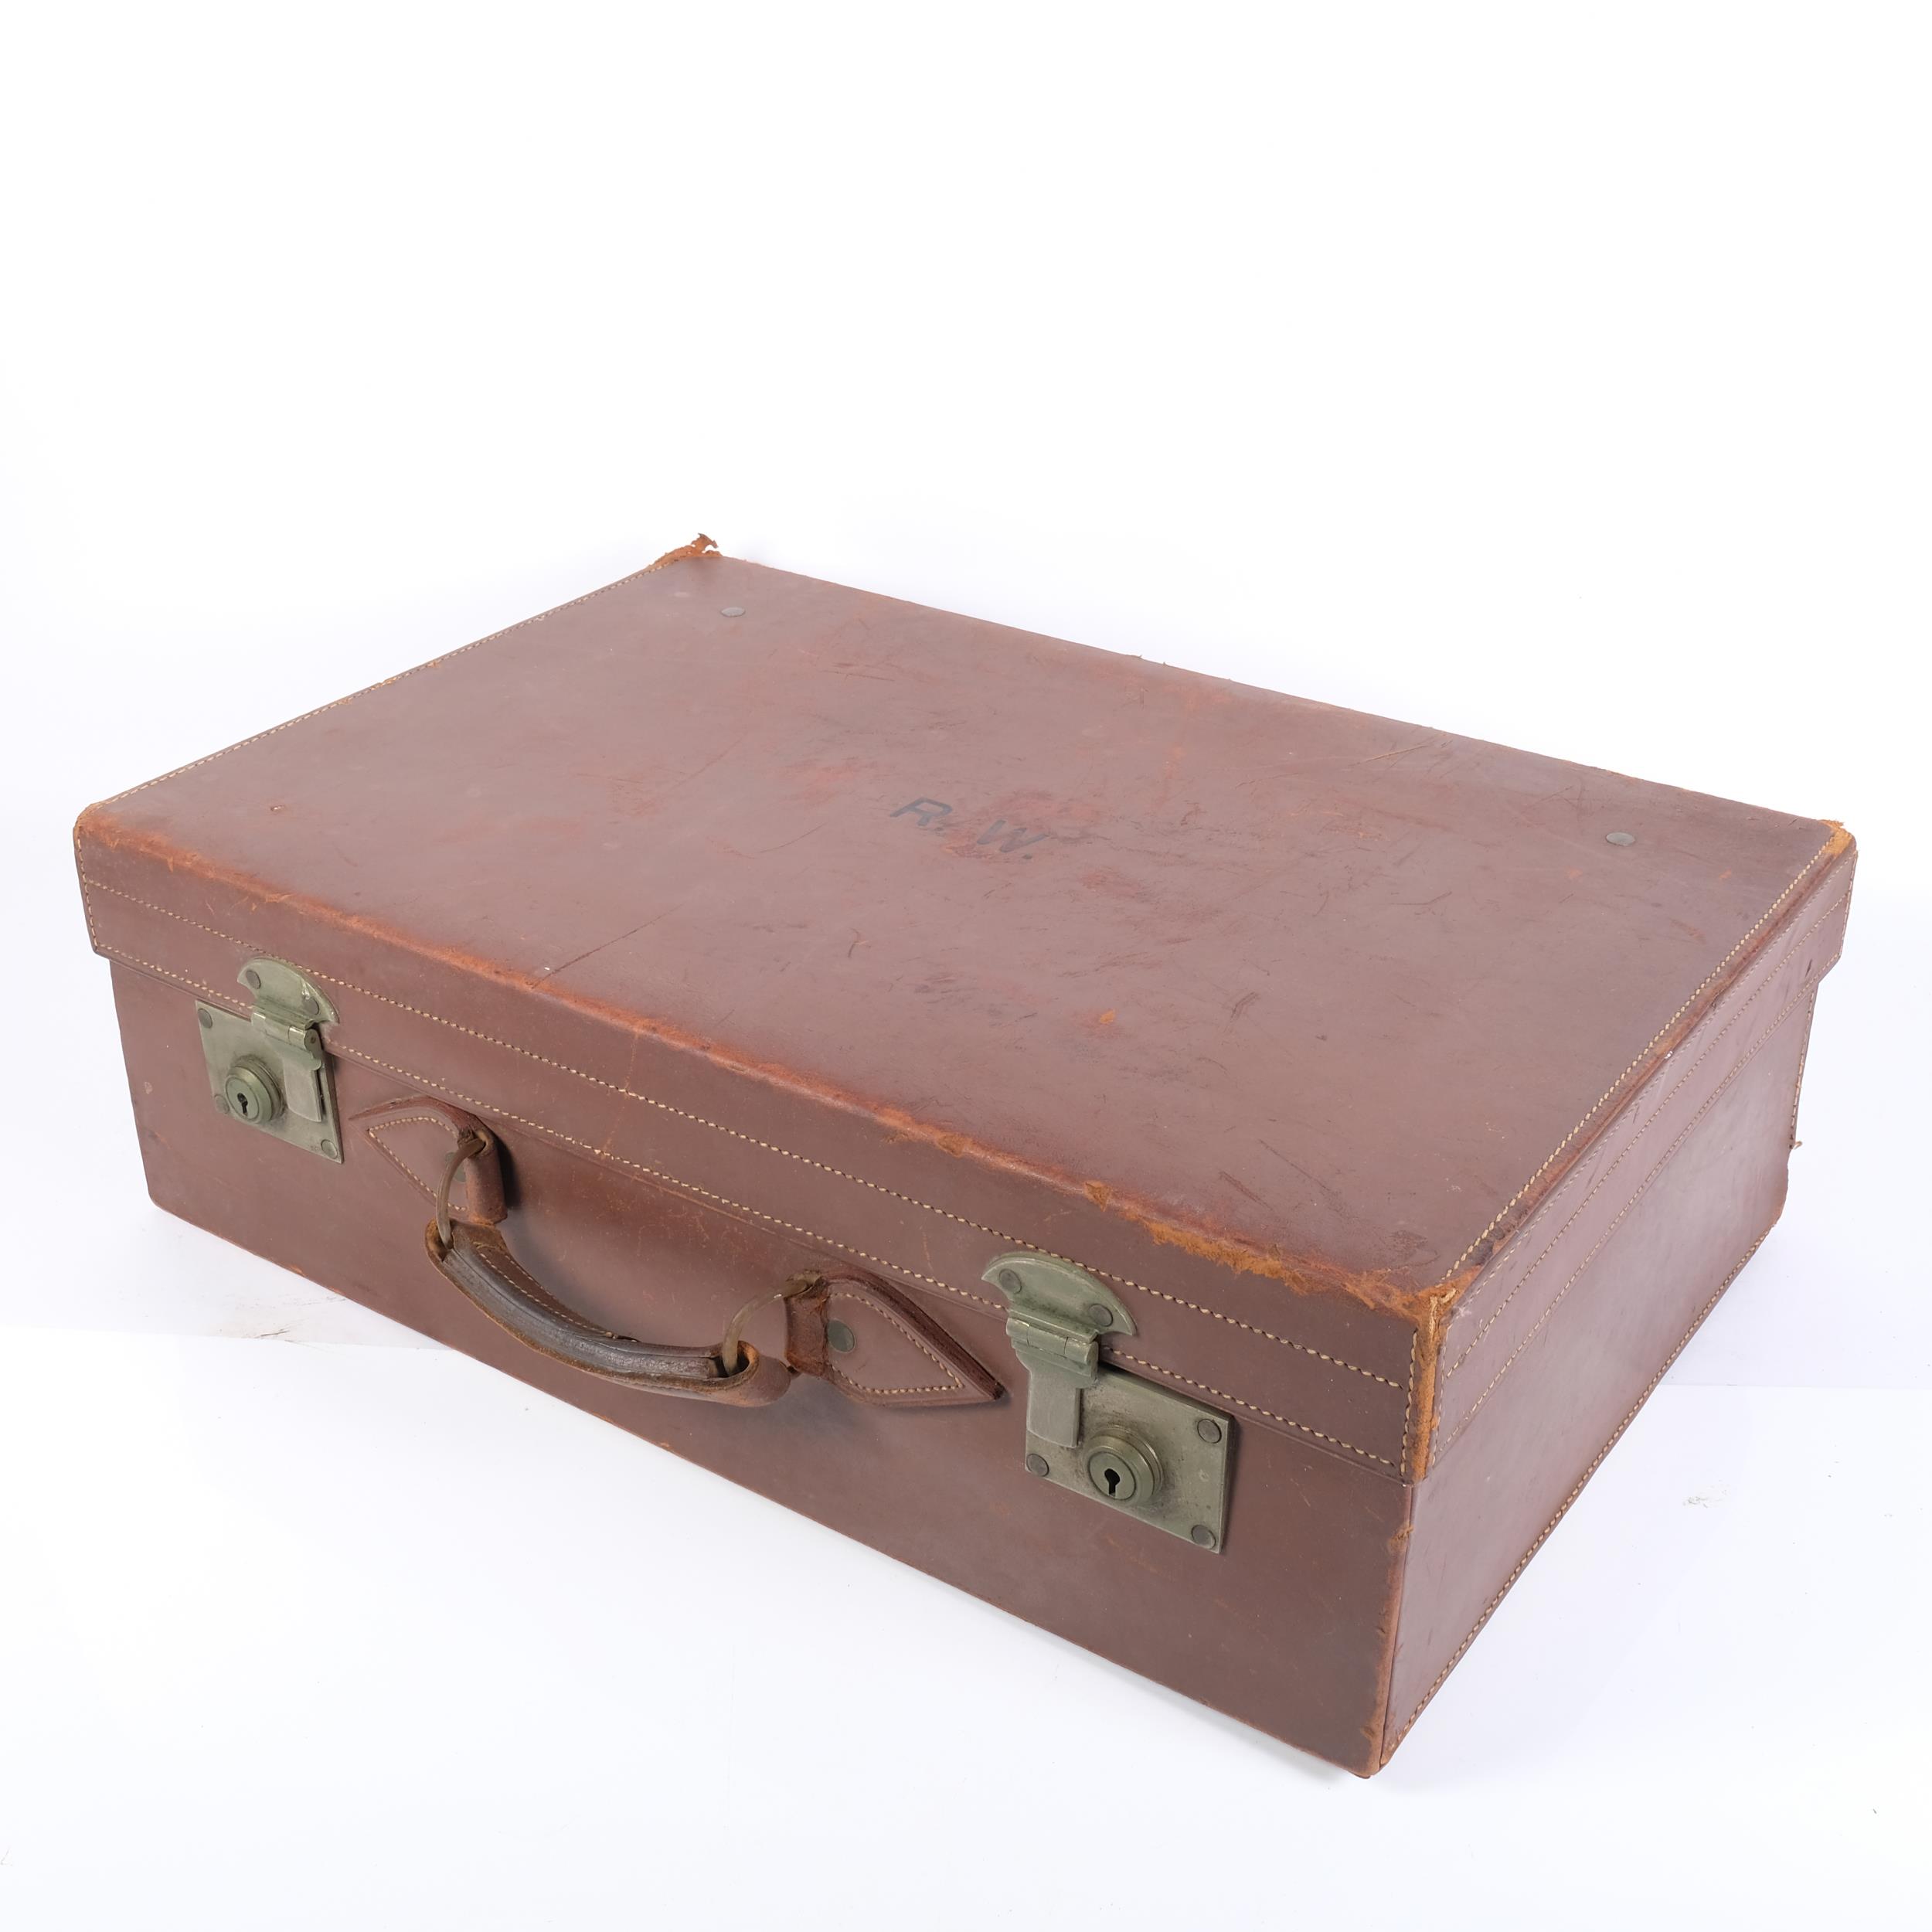 An early 20th century leather-covered gentleman's travelling vanity suitcase, the lid opening to - Image 2 of 2